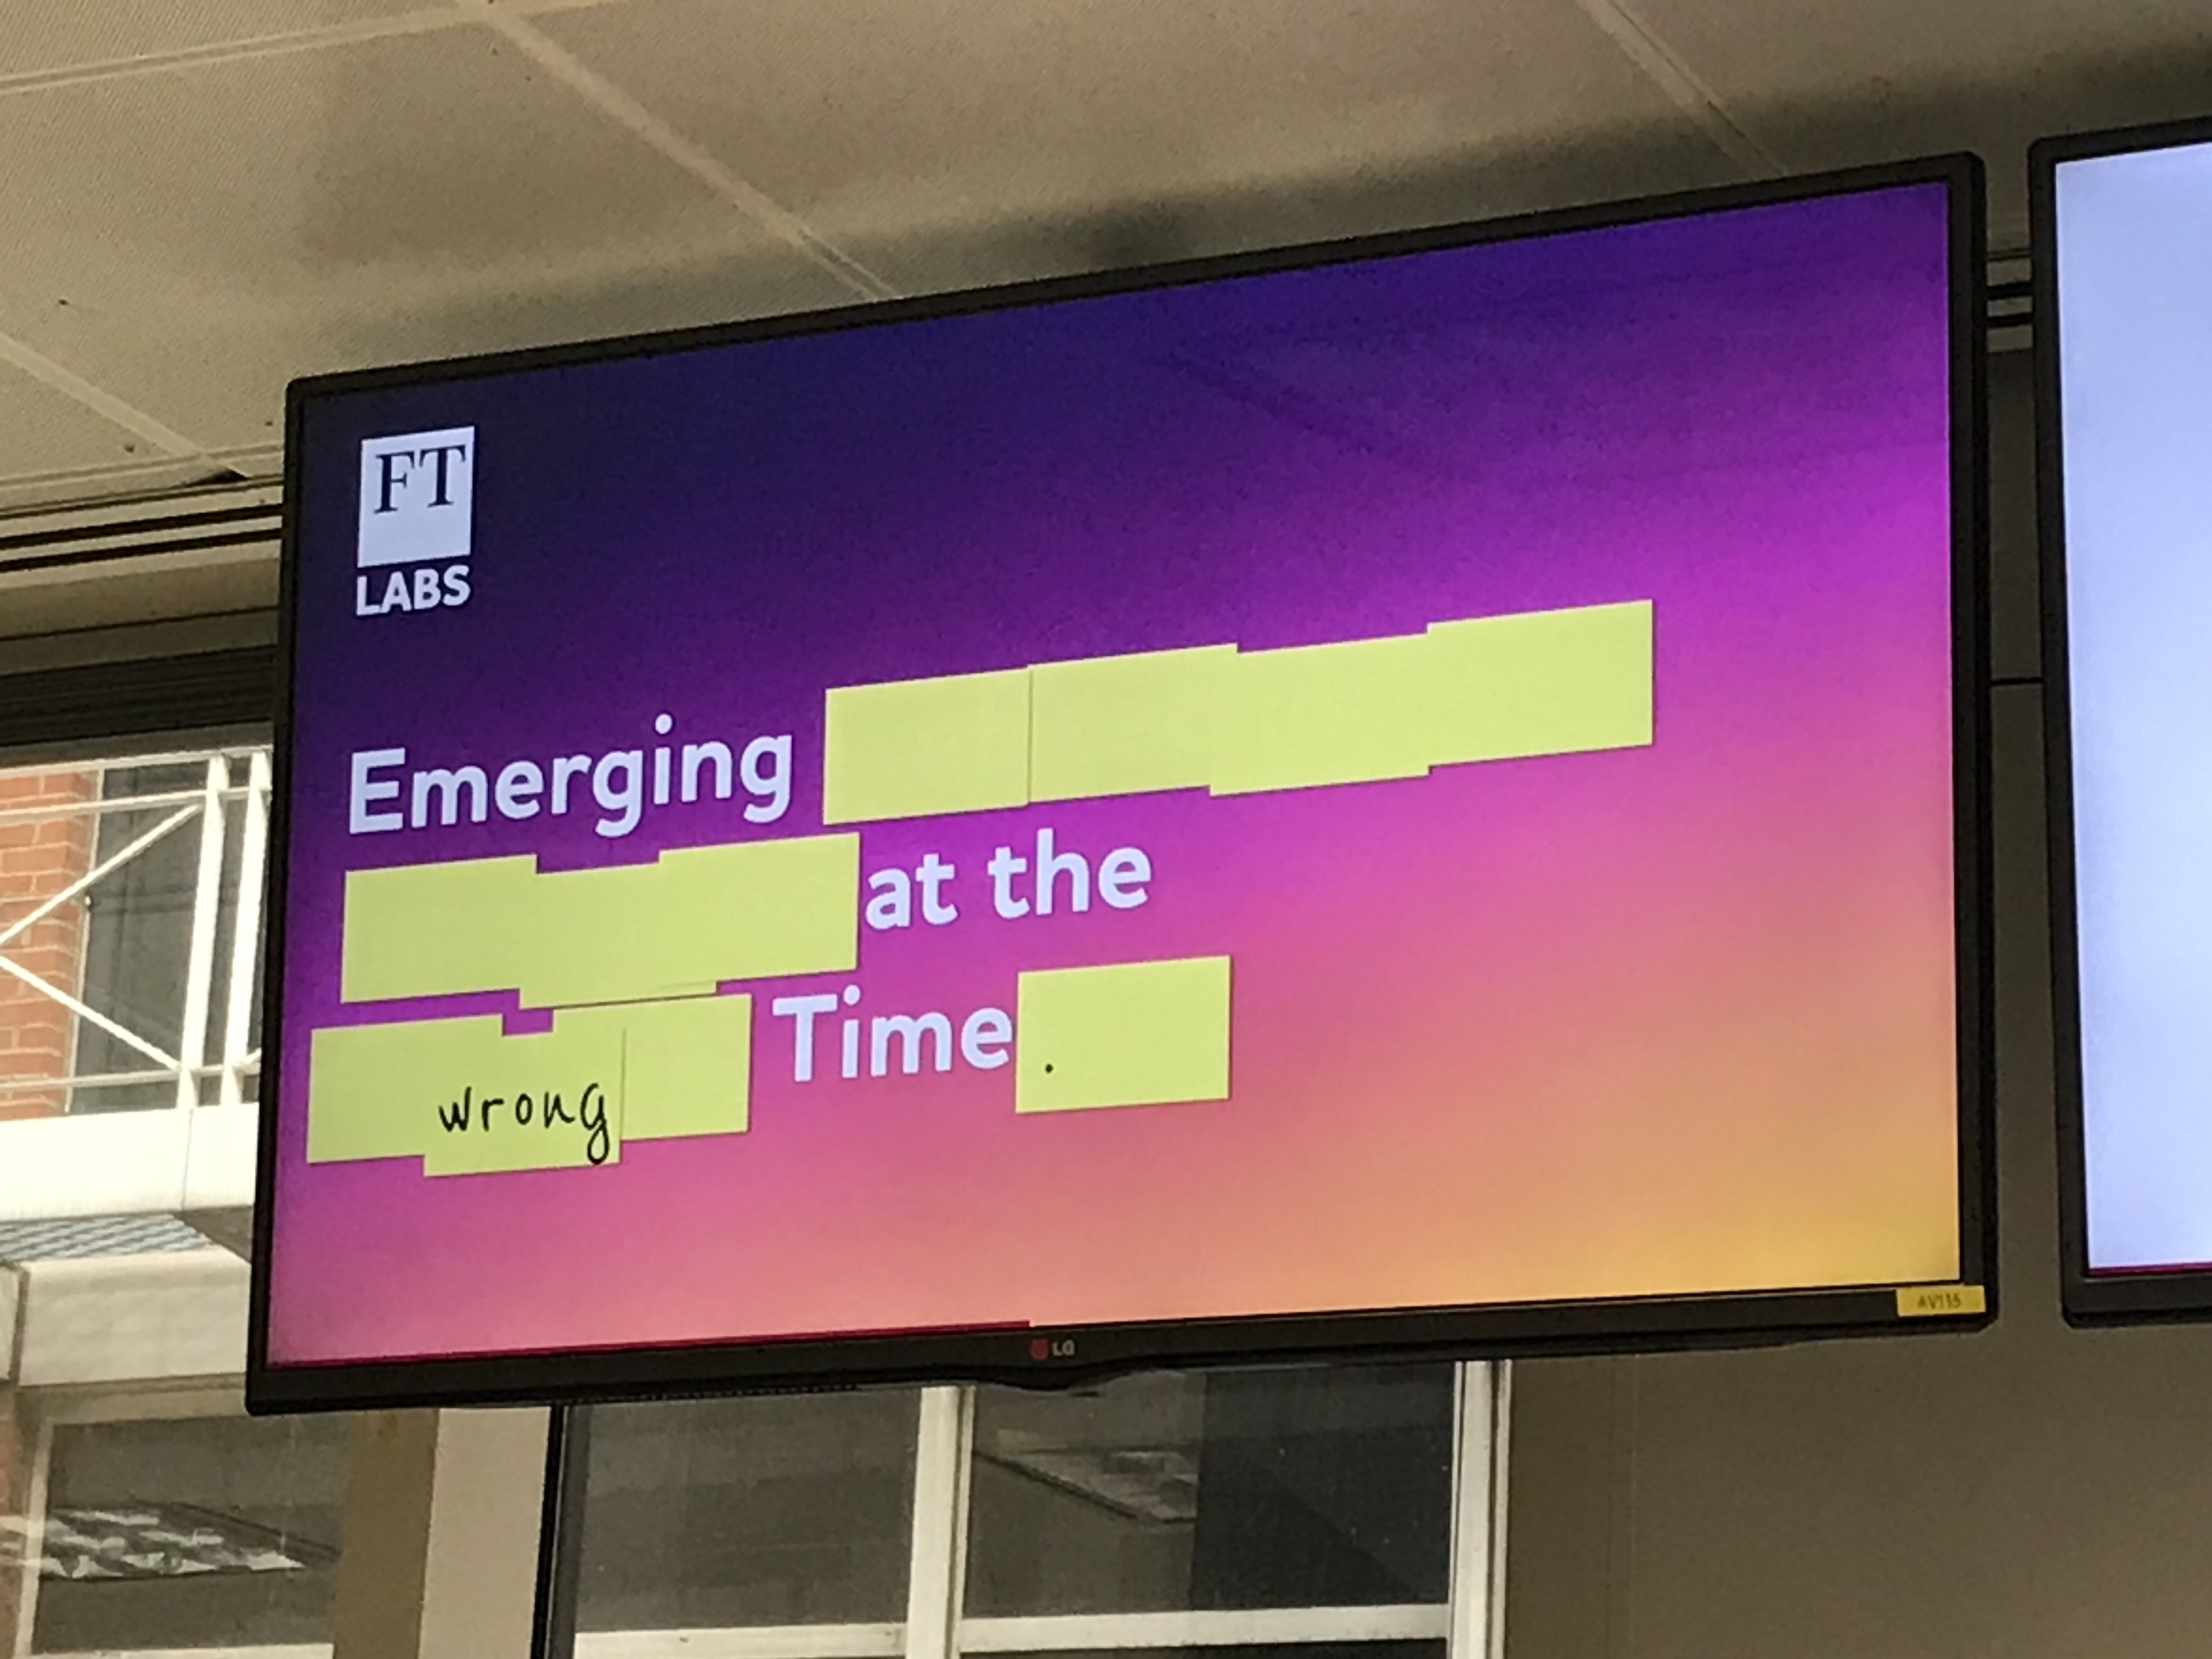 Digital poster: FT Labs, Emerging at the wrong Time.